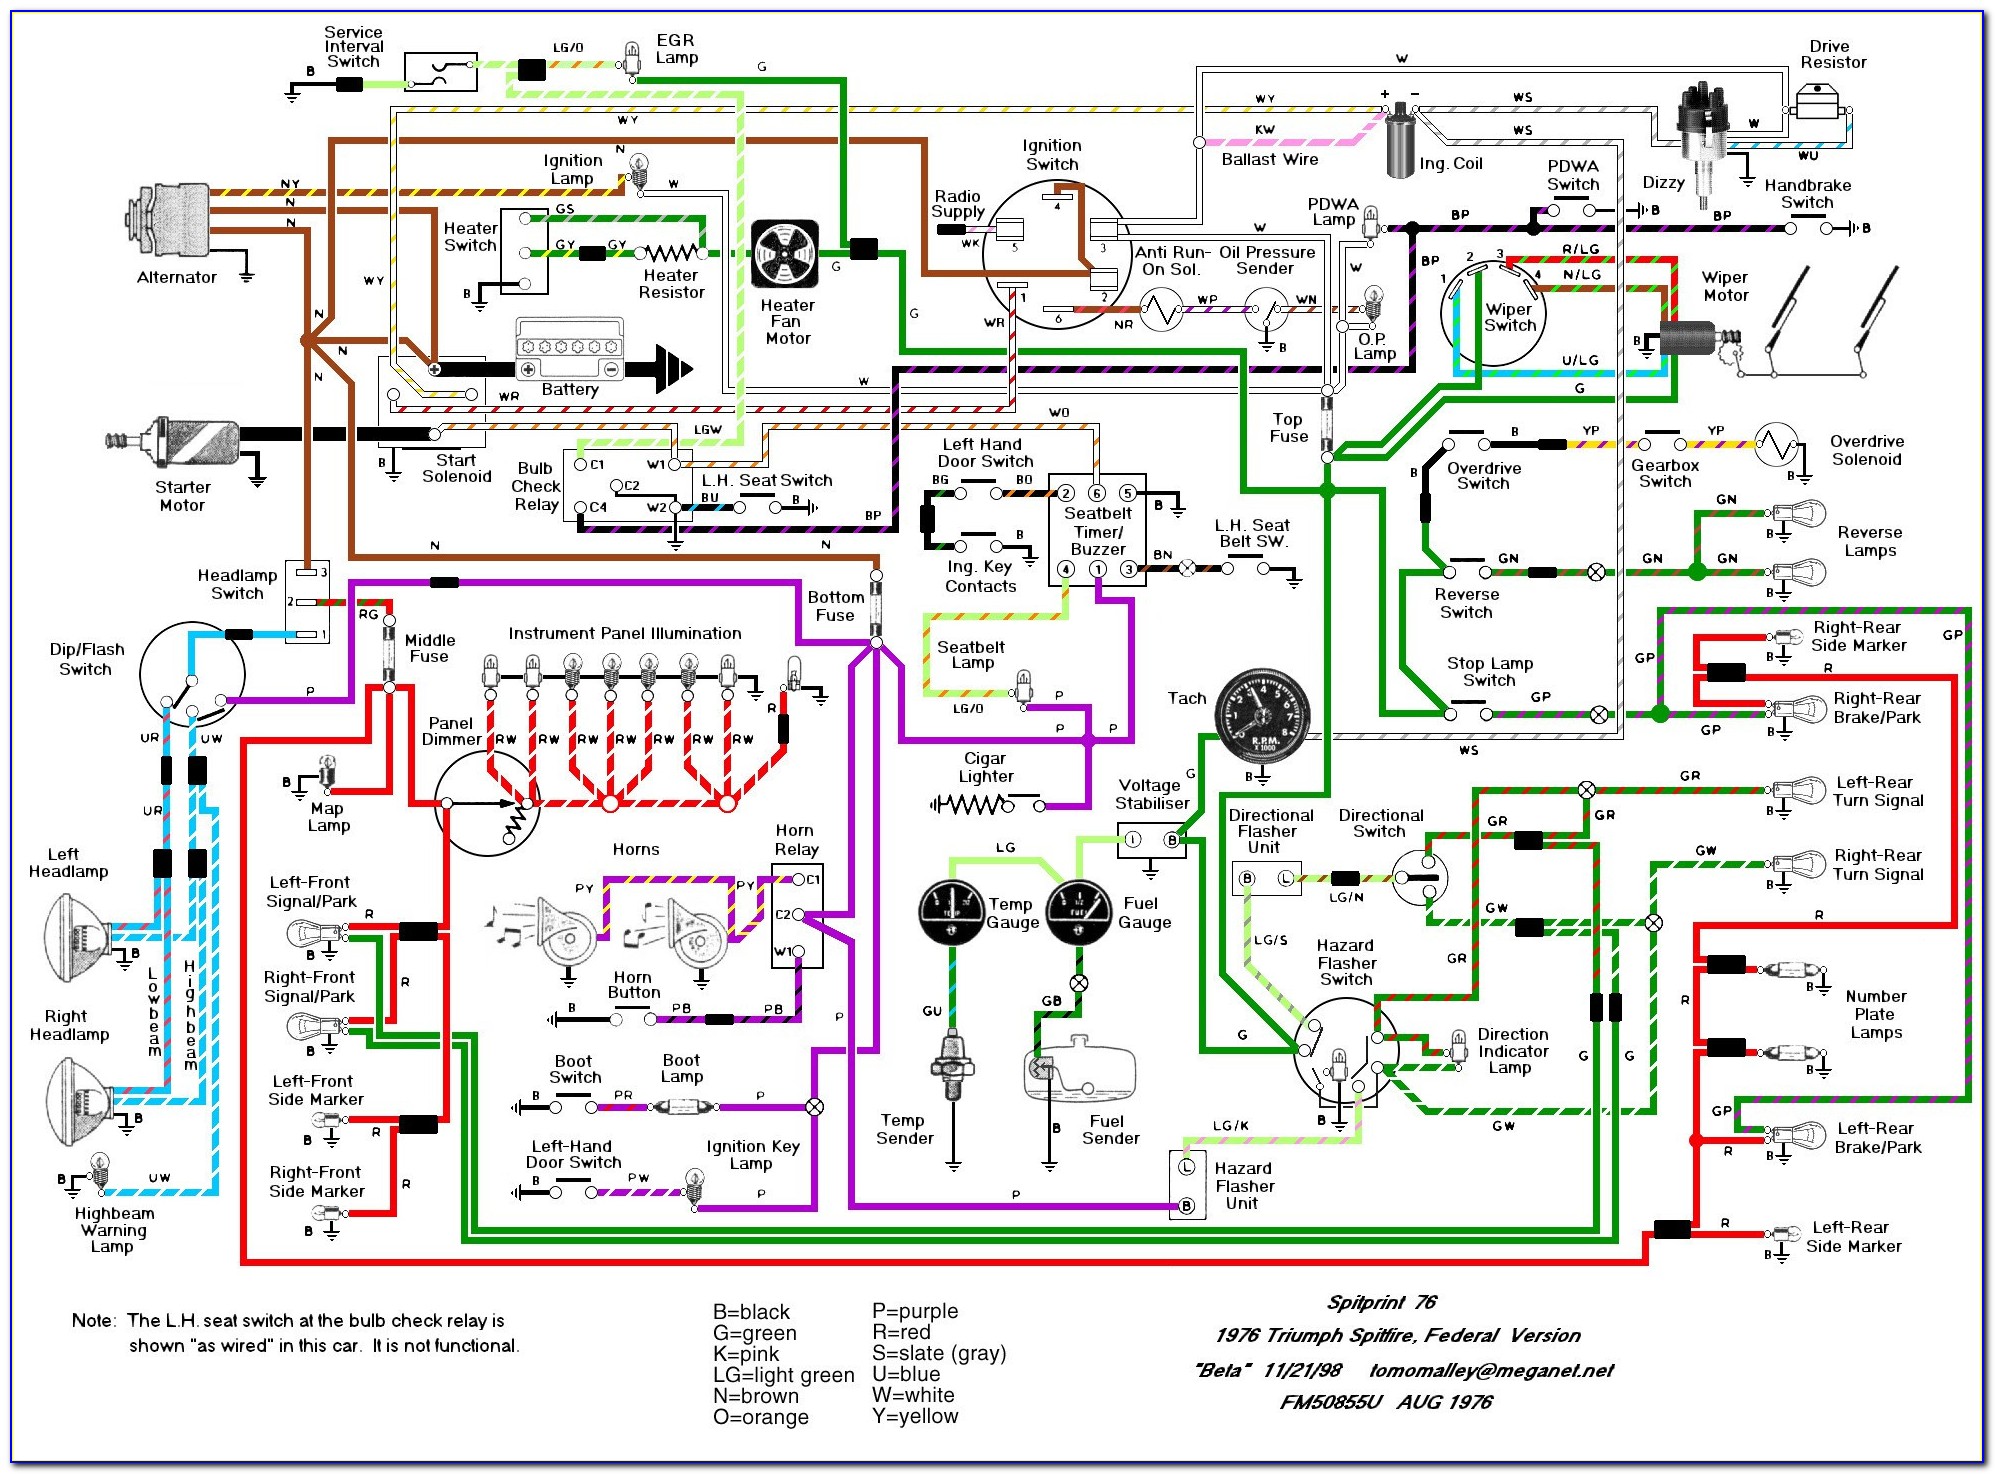 Free Auto Service Repair Manuals And Wiring Diagrams In Pdf